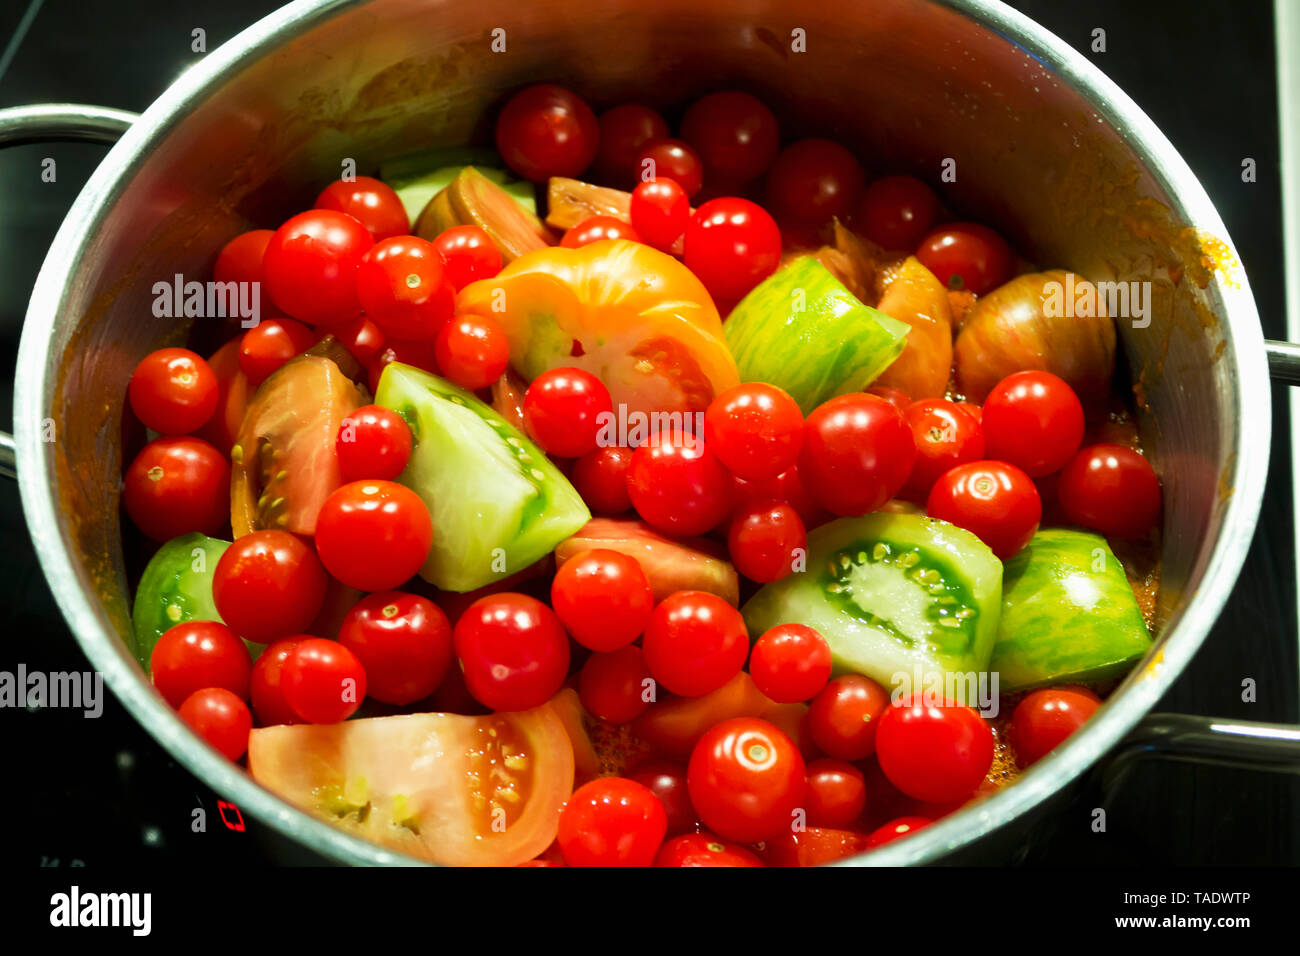 Pile of various tomato sorts in a pot Stock Photo